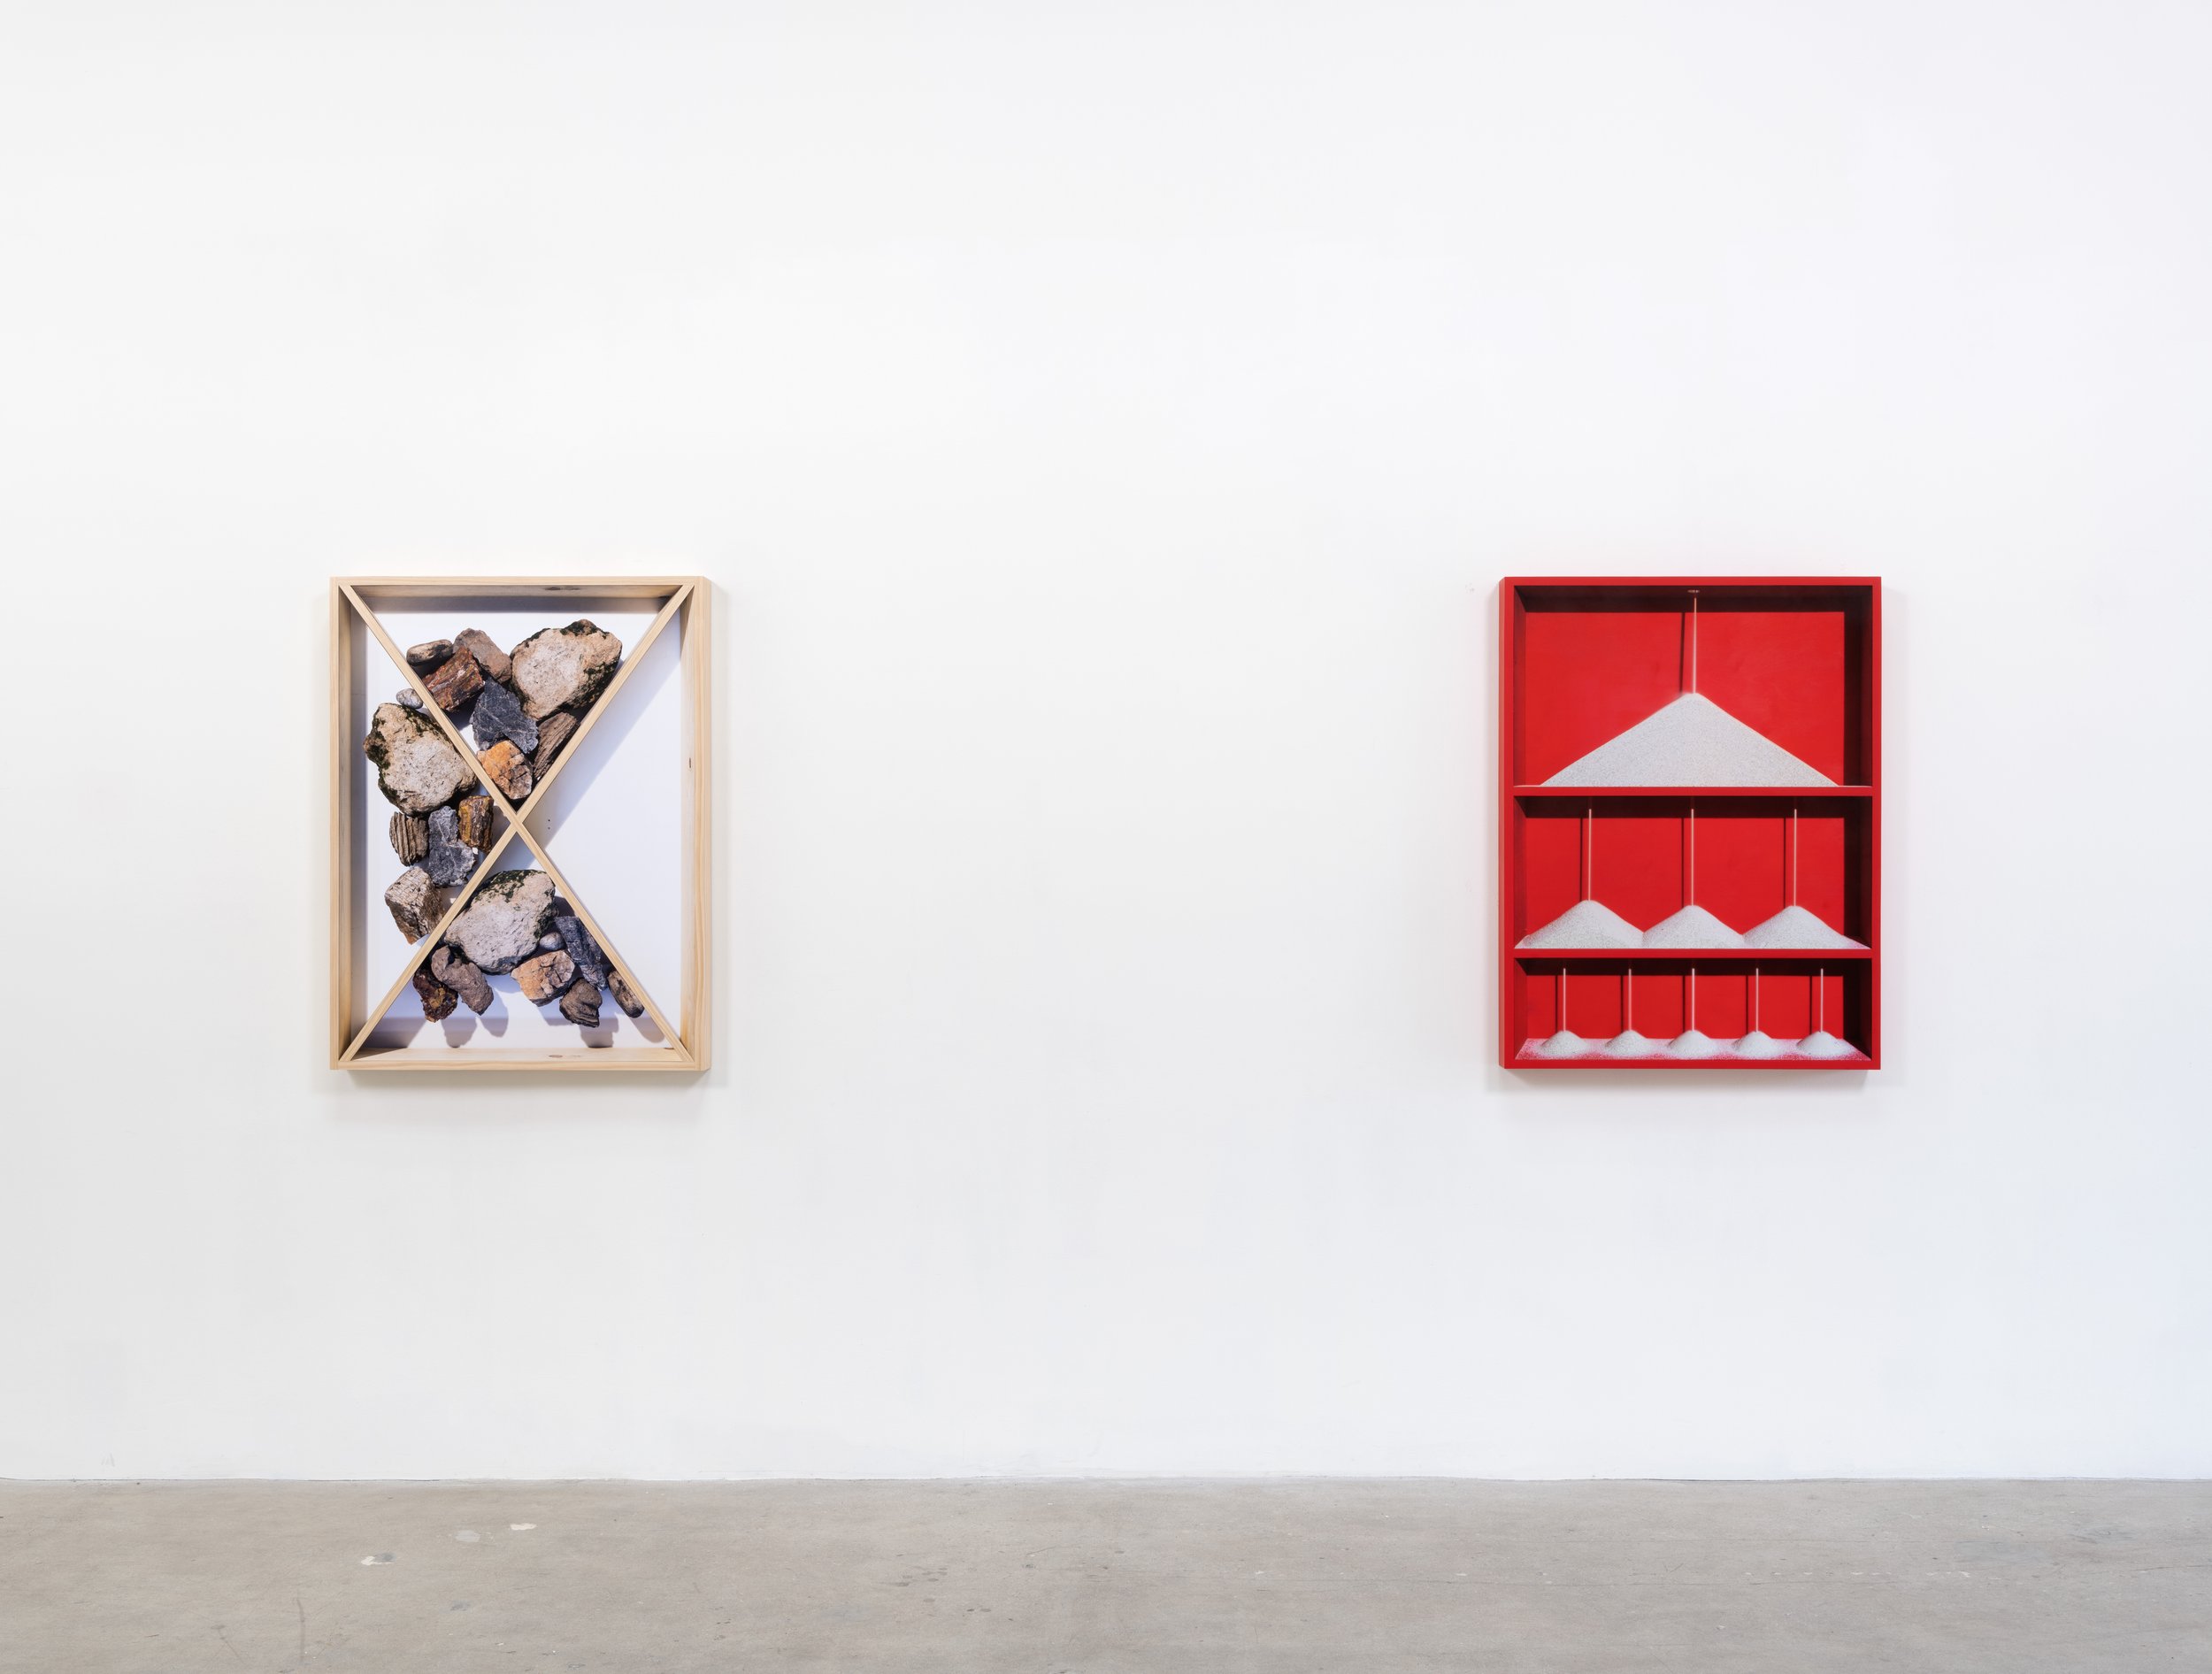  Installation View: Time’s a Taker, March 26 - May 7, 2022, Moskowitz Bayse, Los Angeles. 